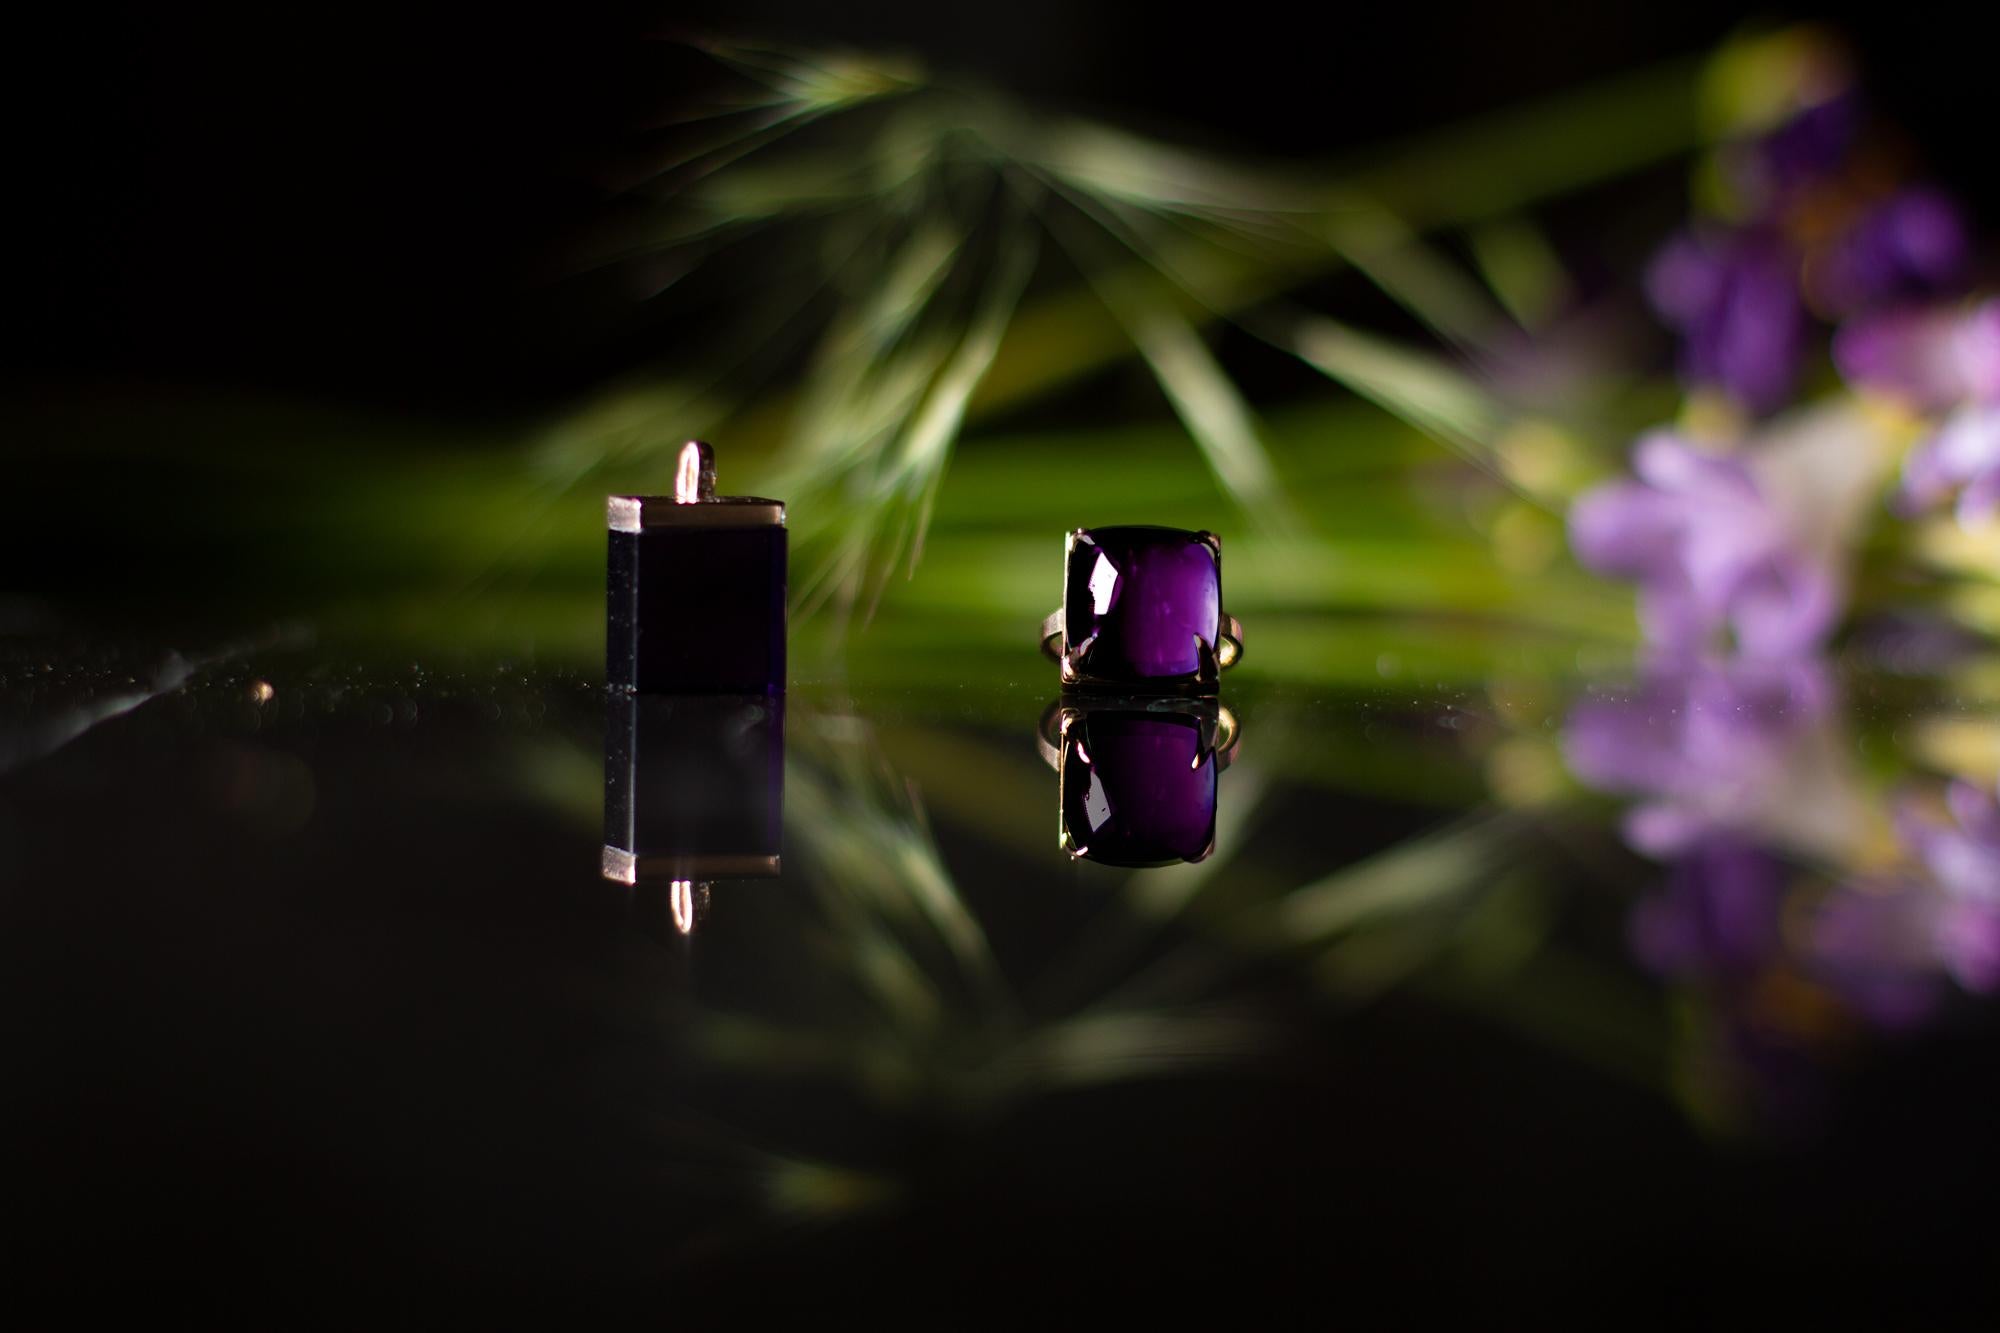 This cocktail ring is made of 18 karat rose gold and sugarloaf cut natural amethyst (12x12 mm, 0,47x0,47 inches). This ring can be personally signed. 

When for most of the gem it works the way: the smaller prongs the better. This is the shape and